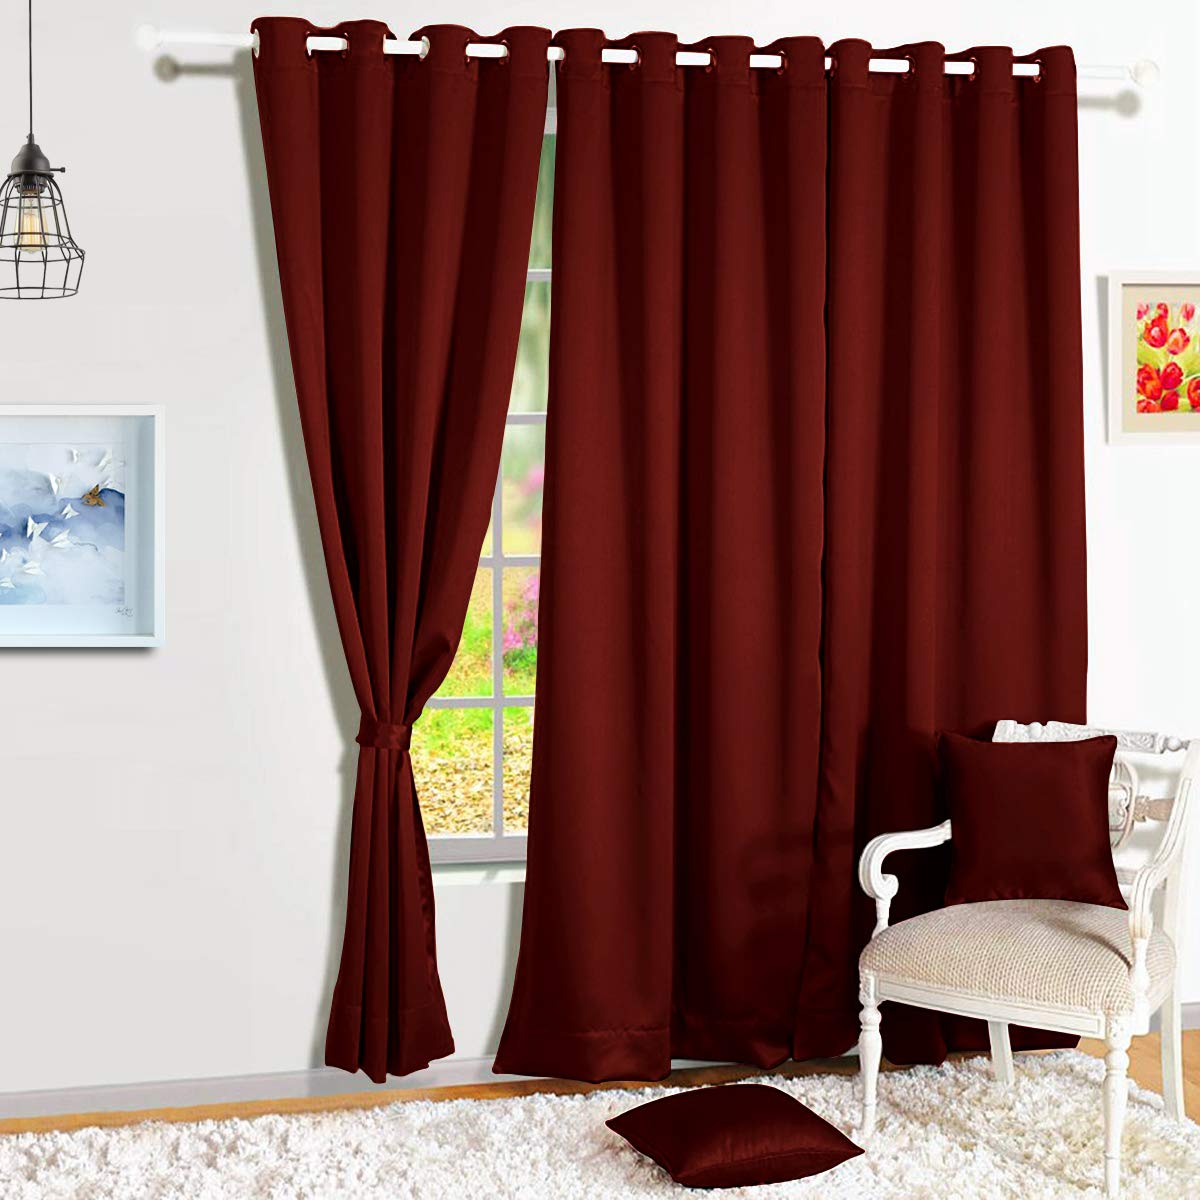 Best Home Curtains Most Por Curtain Fabrics Suitable For Your Serial Blinds High Quality Bespoke And